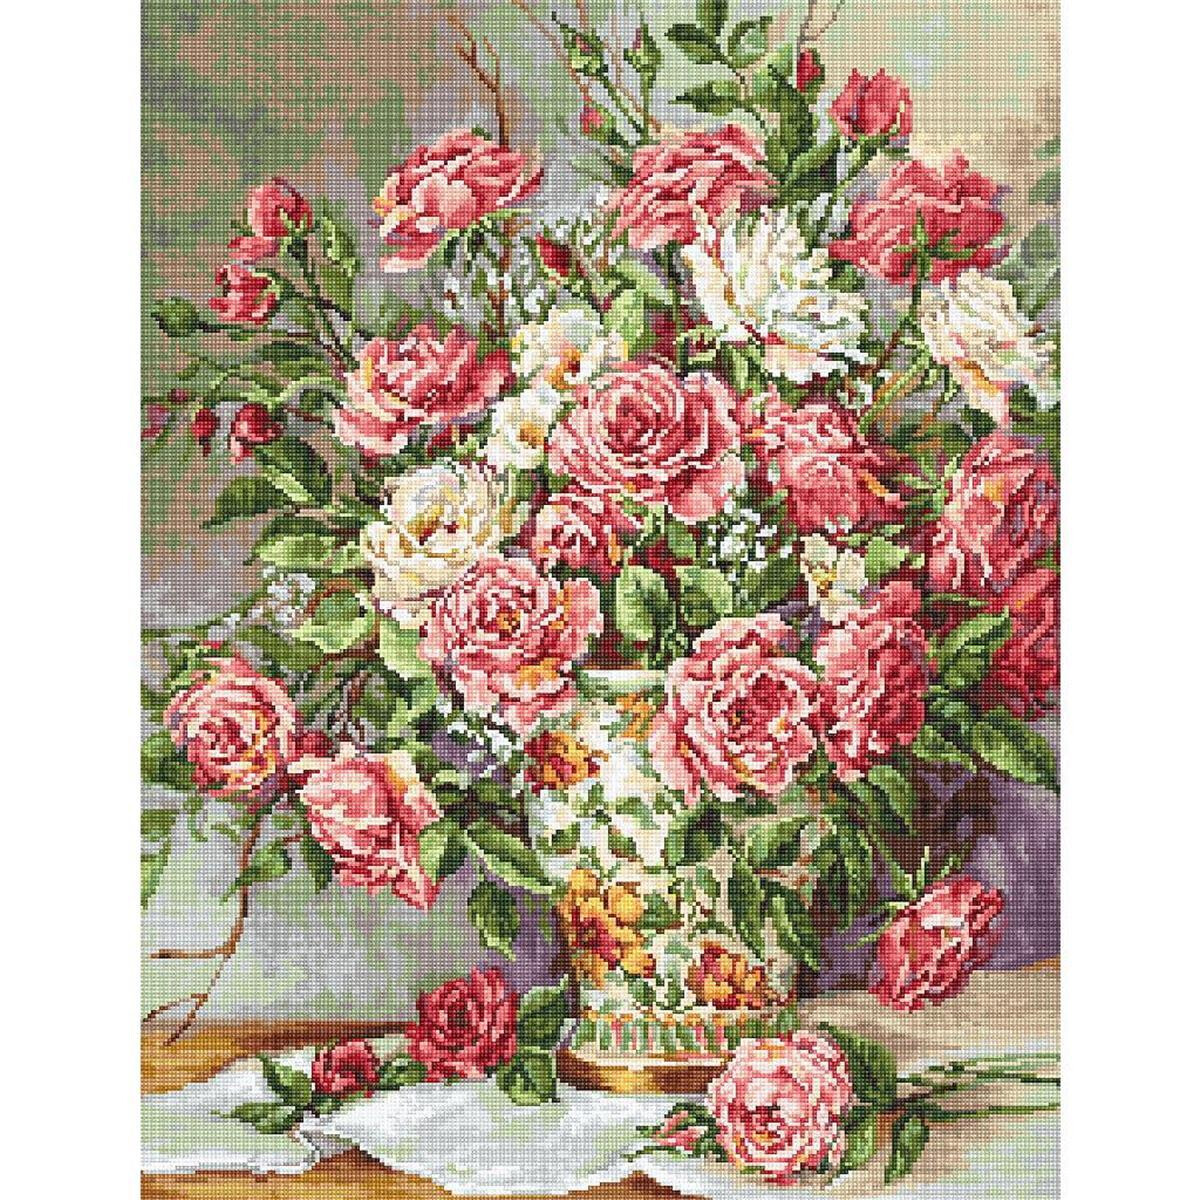 A bouquet of pink and white roses in a decorative vase...